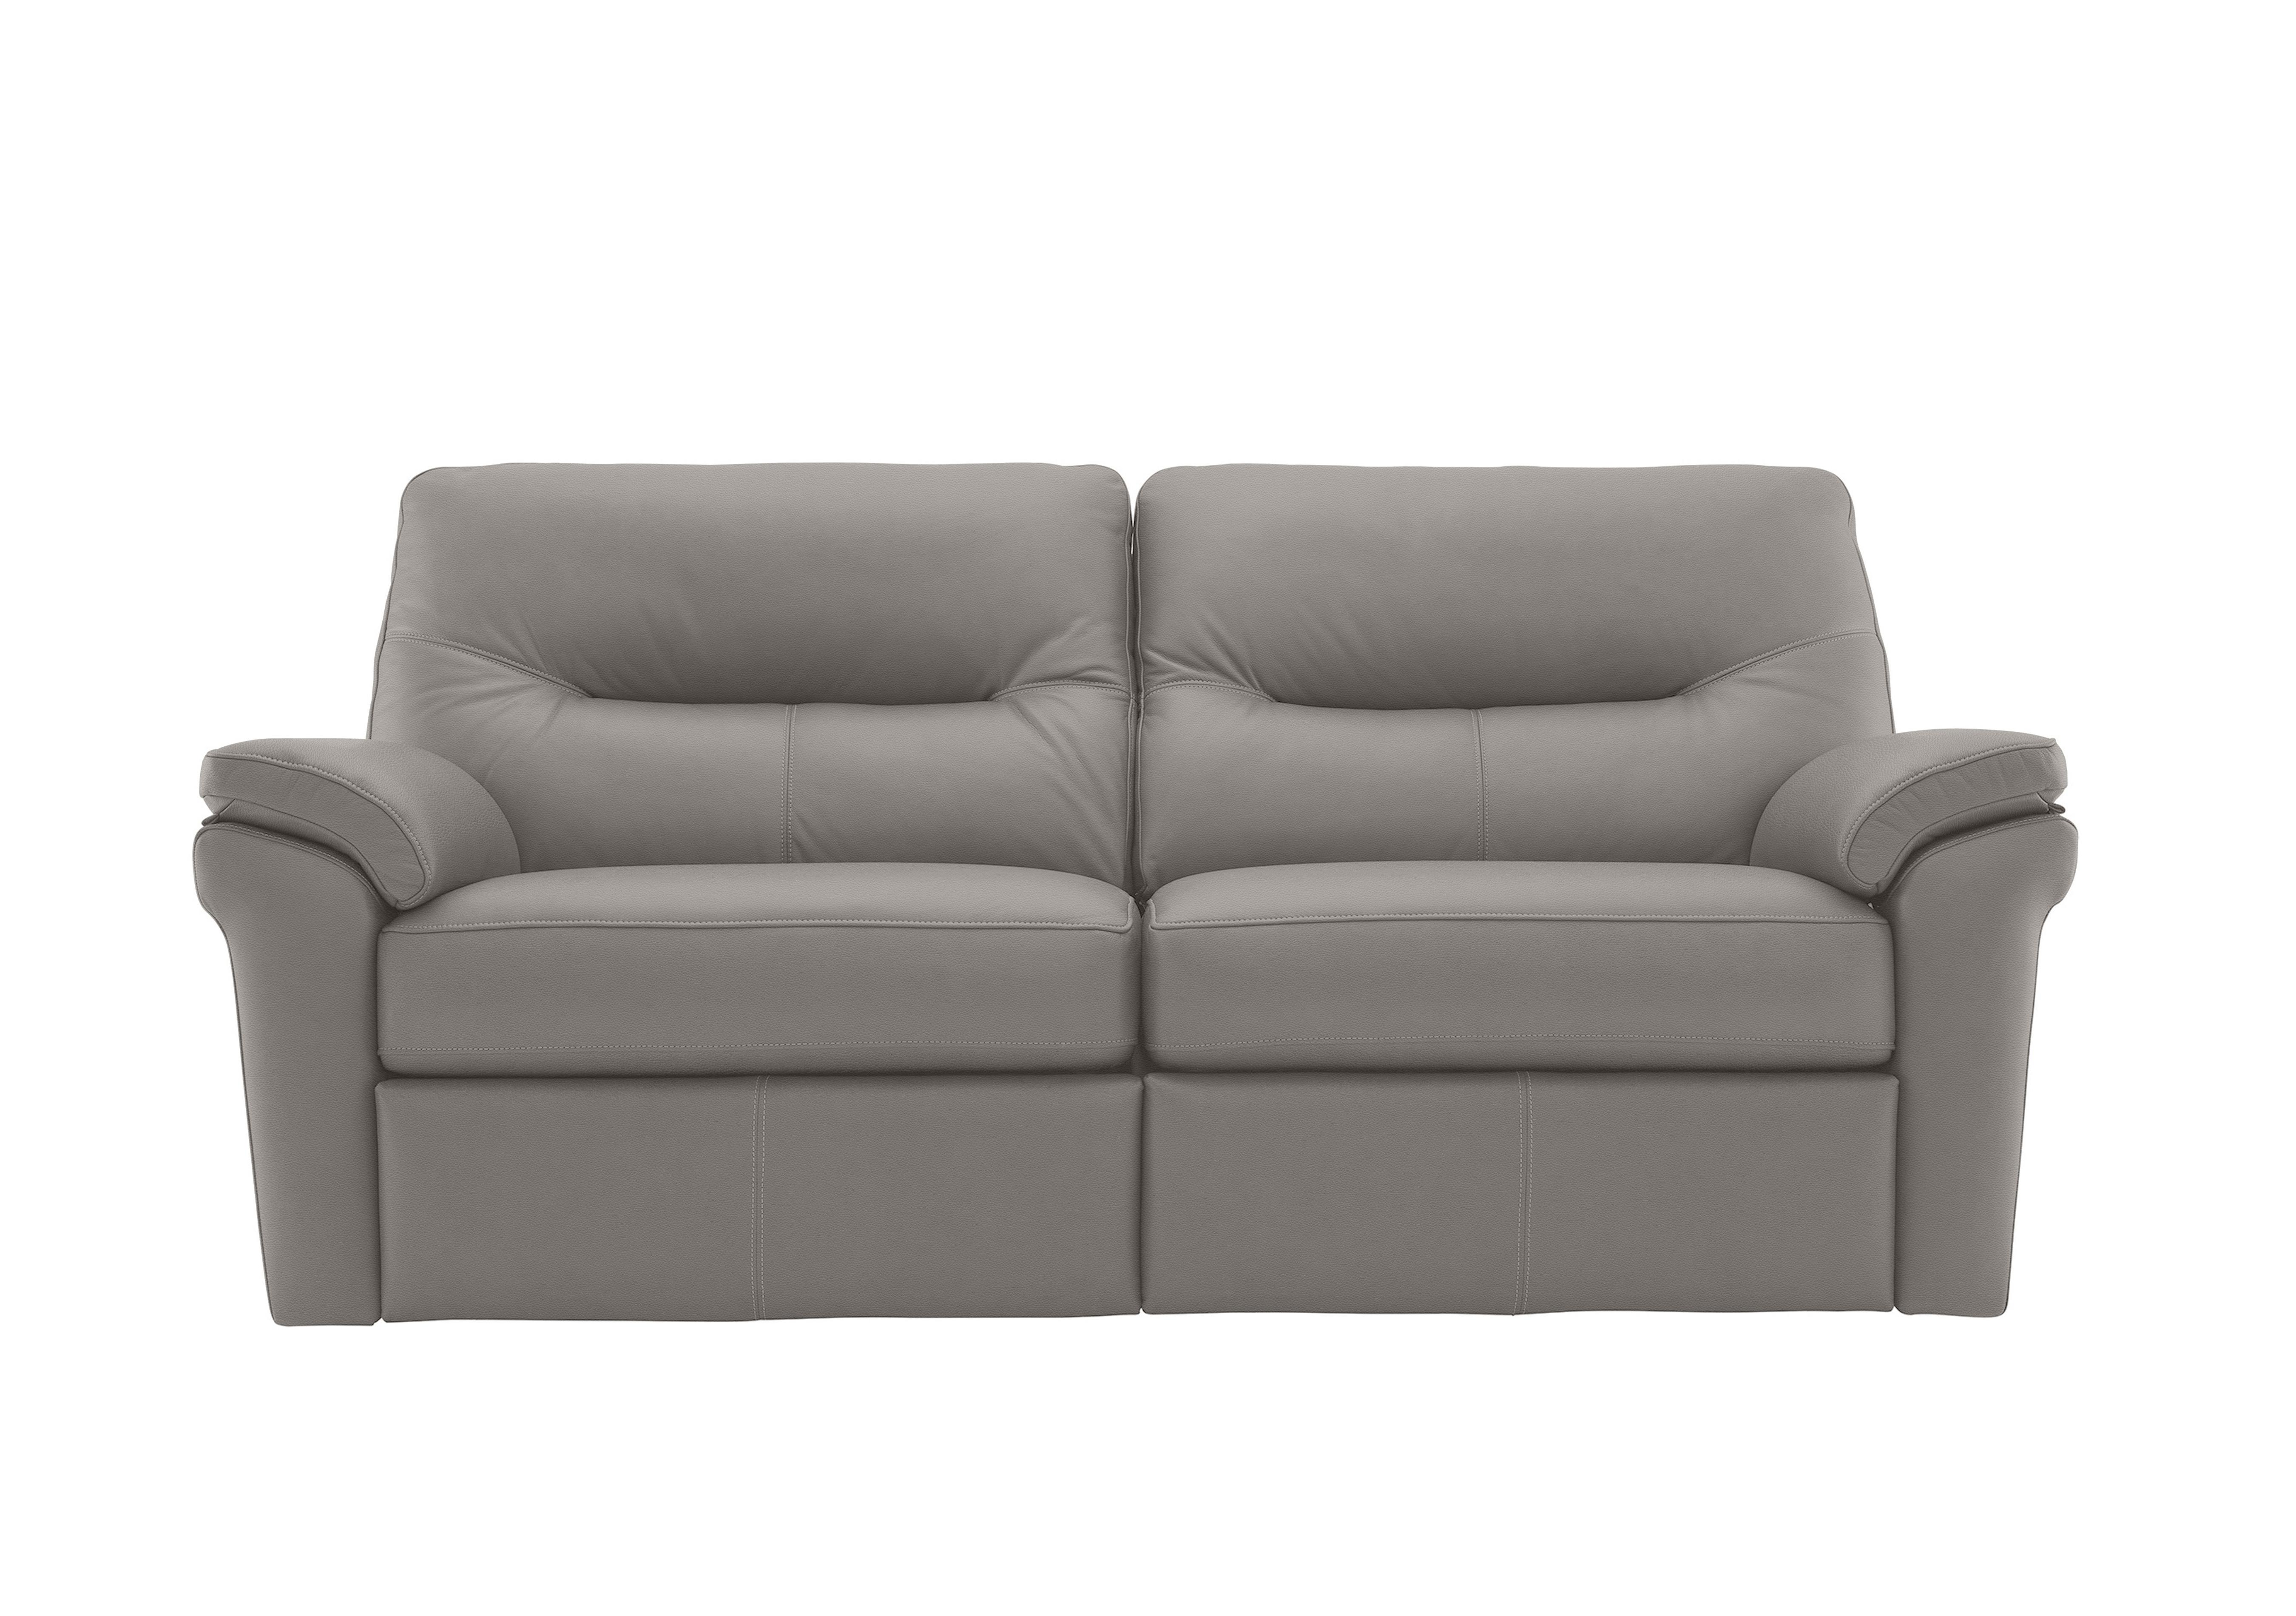 Seattle 3 Seater Leather Sofa in L842 Cambridge Grey on Furniture Village